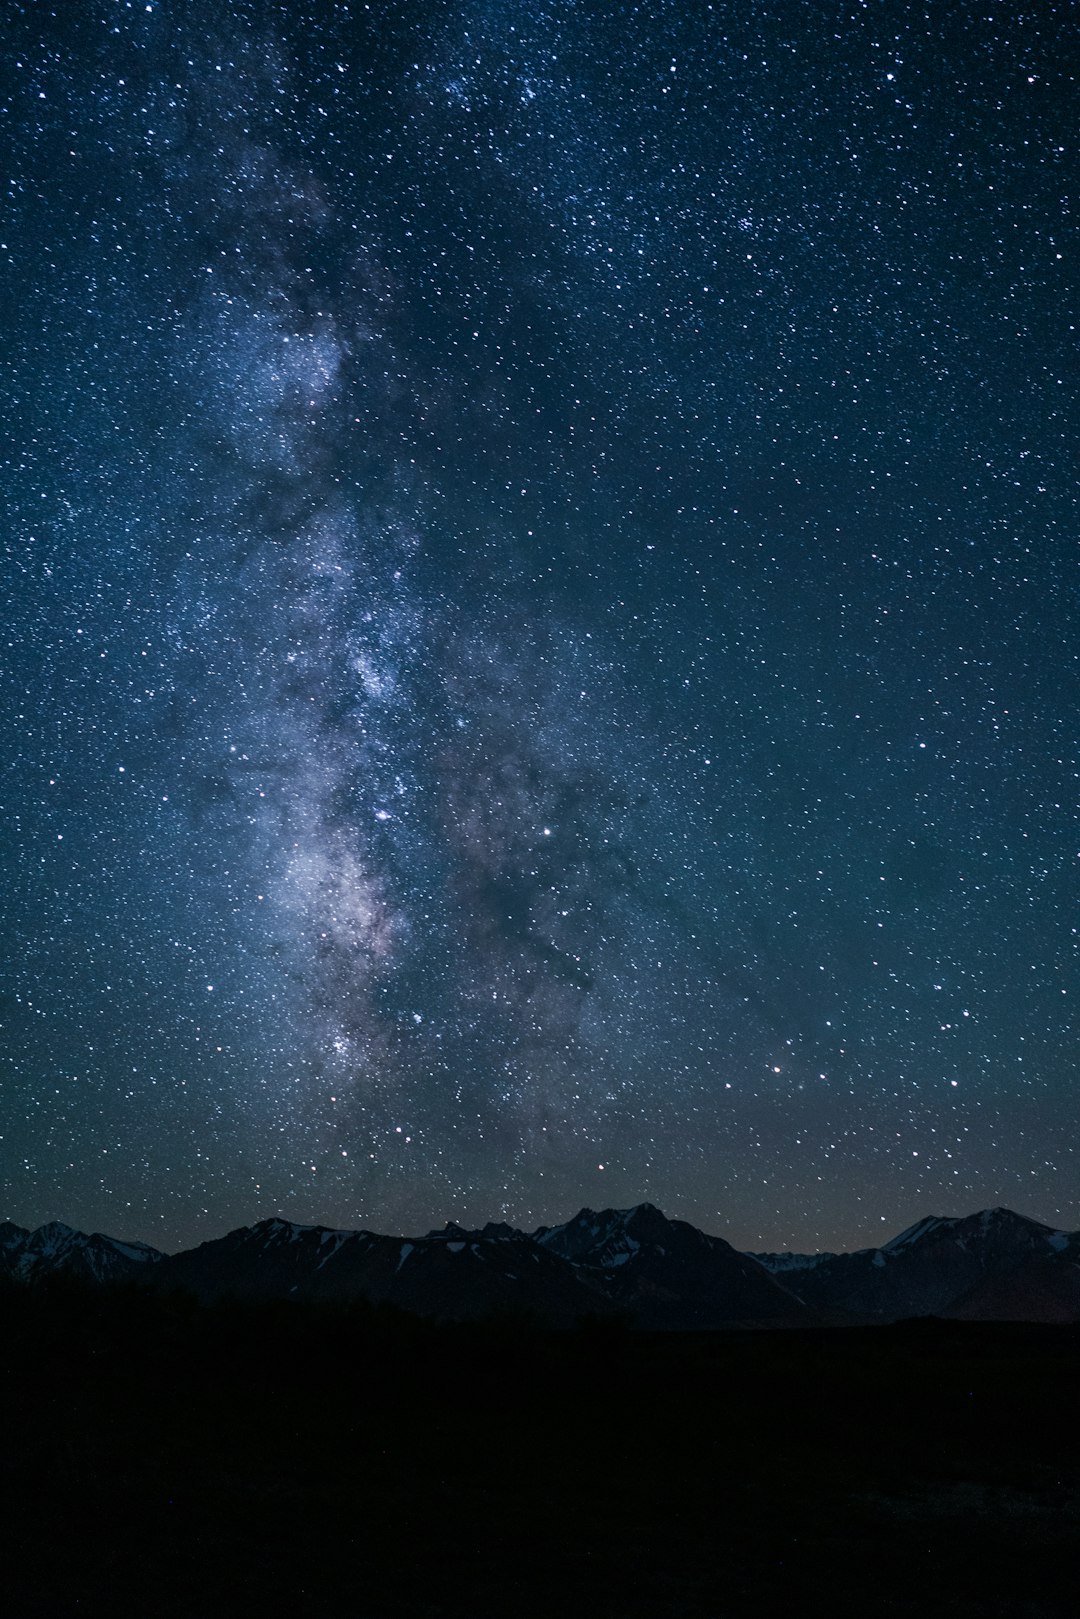 A breathtaking view of the Milky Way galaxy illuminates the dark night sky with stars and distant mountains below. Captured in the style of a professional photographer with high-resolution and sharp photography equipment. The composition is centered on the starry backdrop with the silhouette of mountain peaks adding depth to the scene. High contrast lighting highlights the celestial beauty against the black background. A wide-angle lens provides a full panoramic view. –ar 85:128